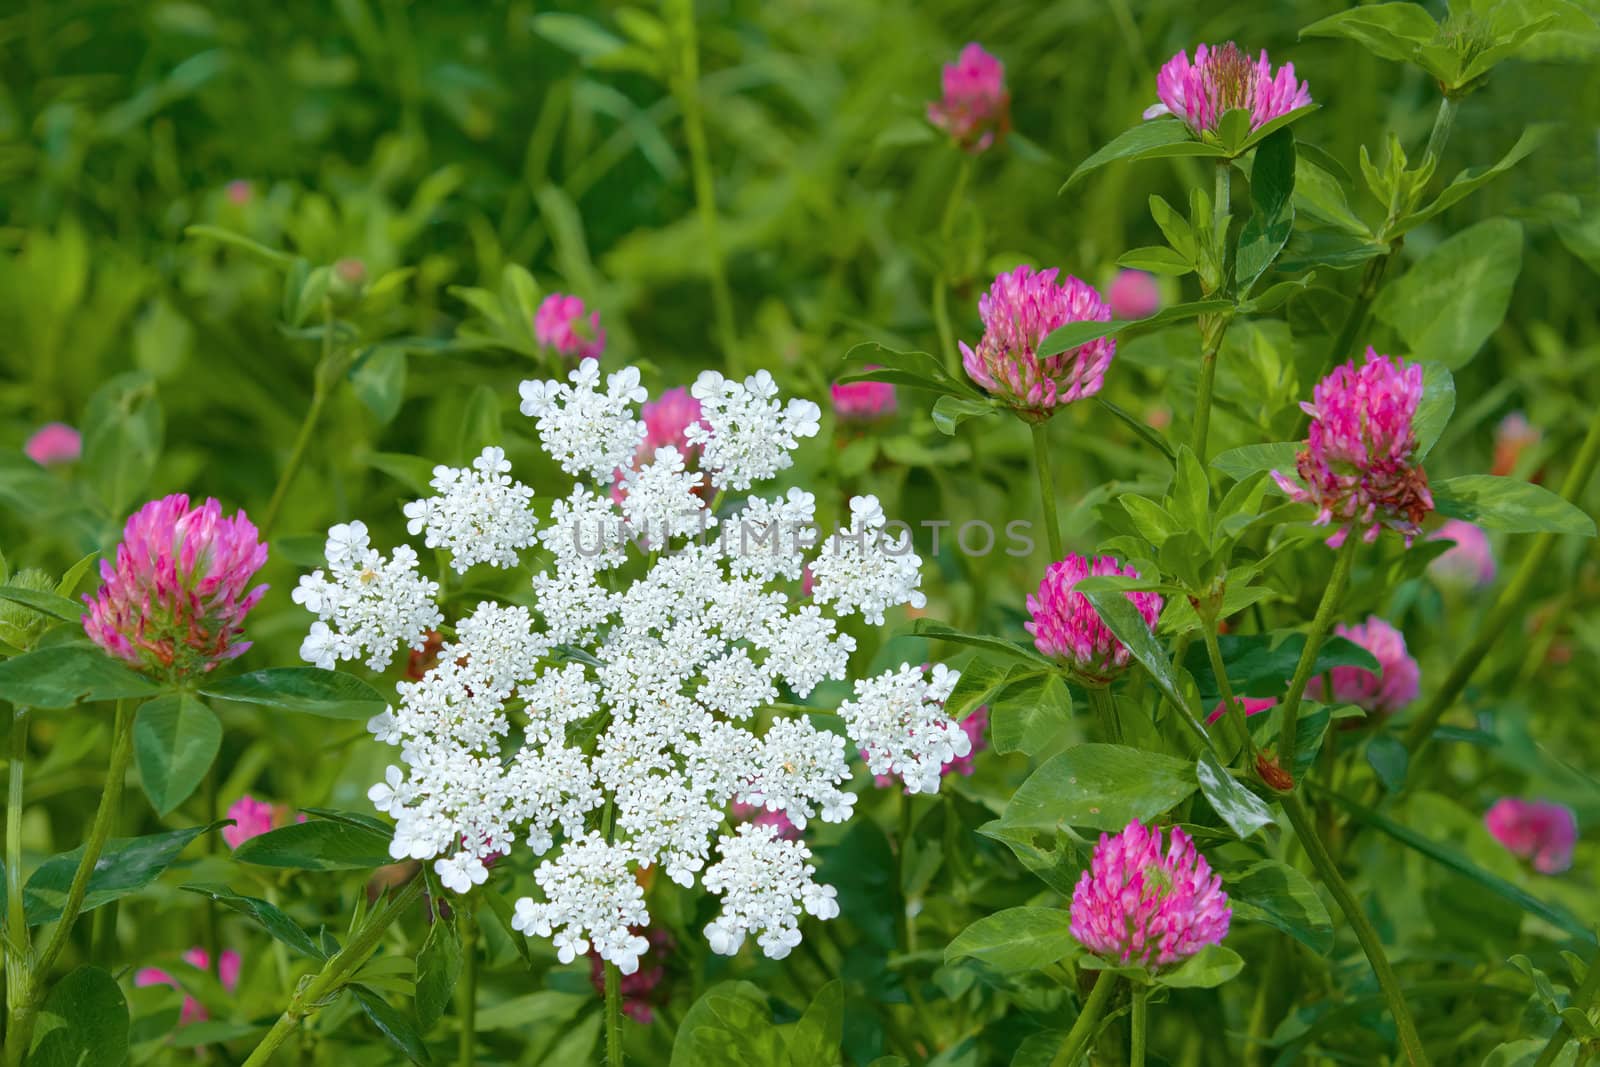 Clover and plant of Apiaceae family flowering in a meadow